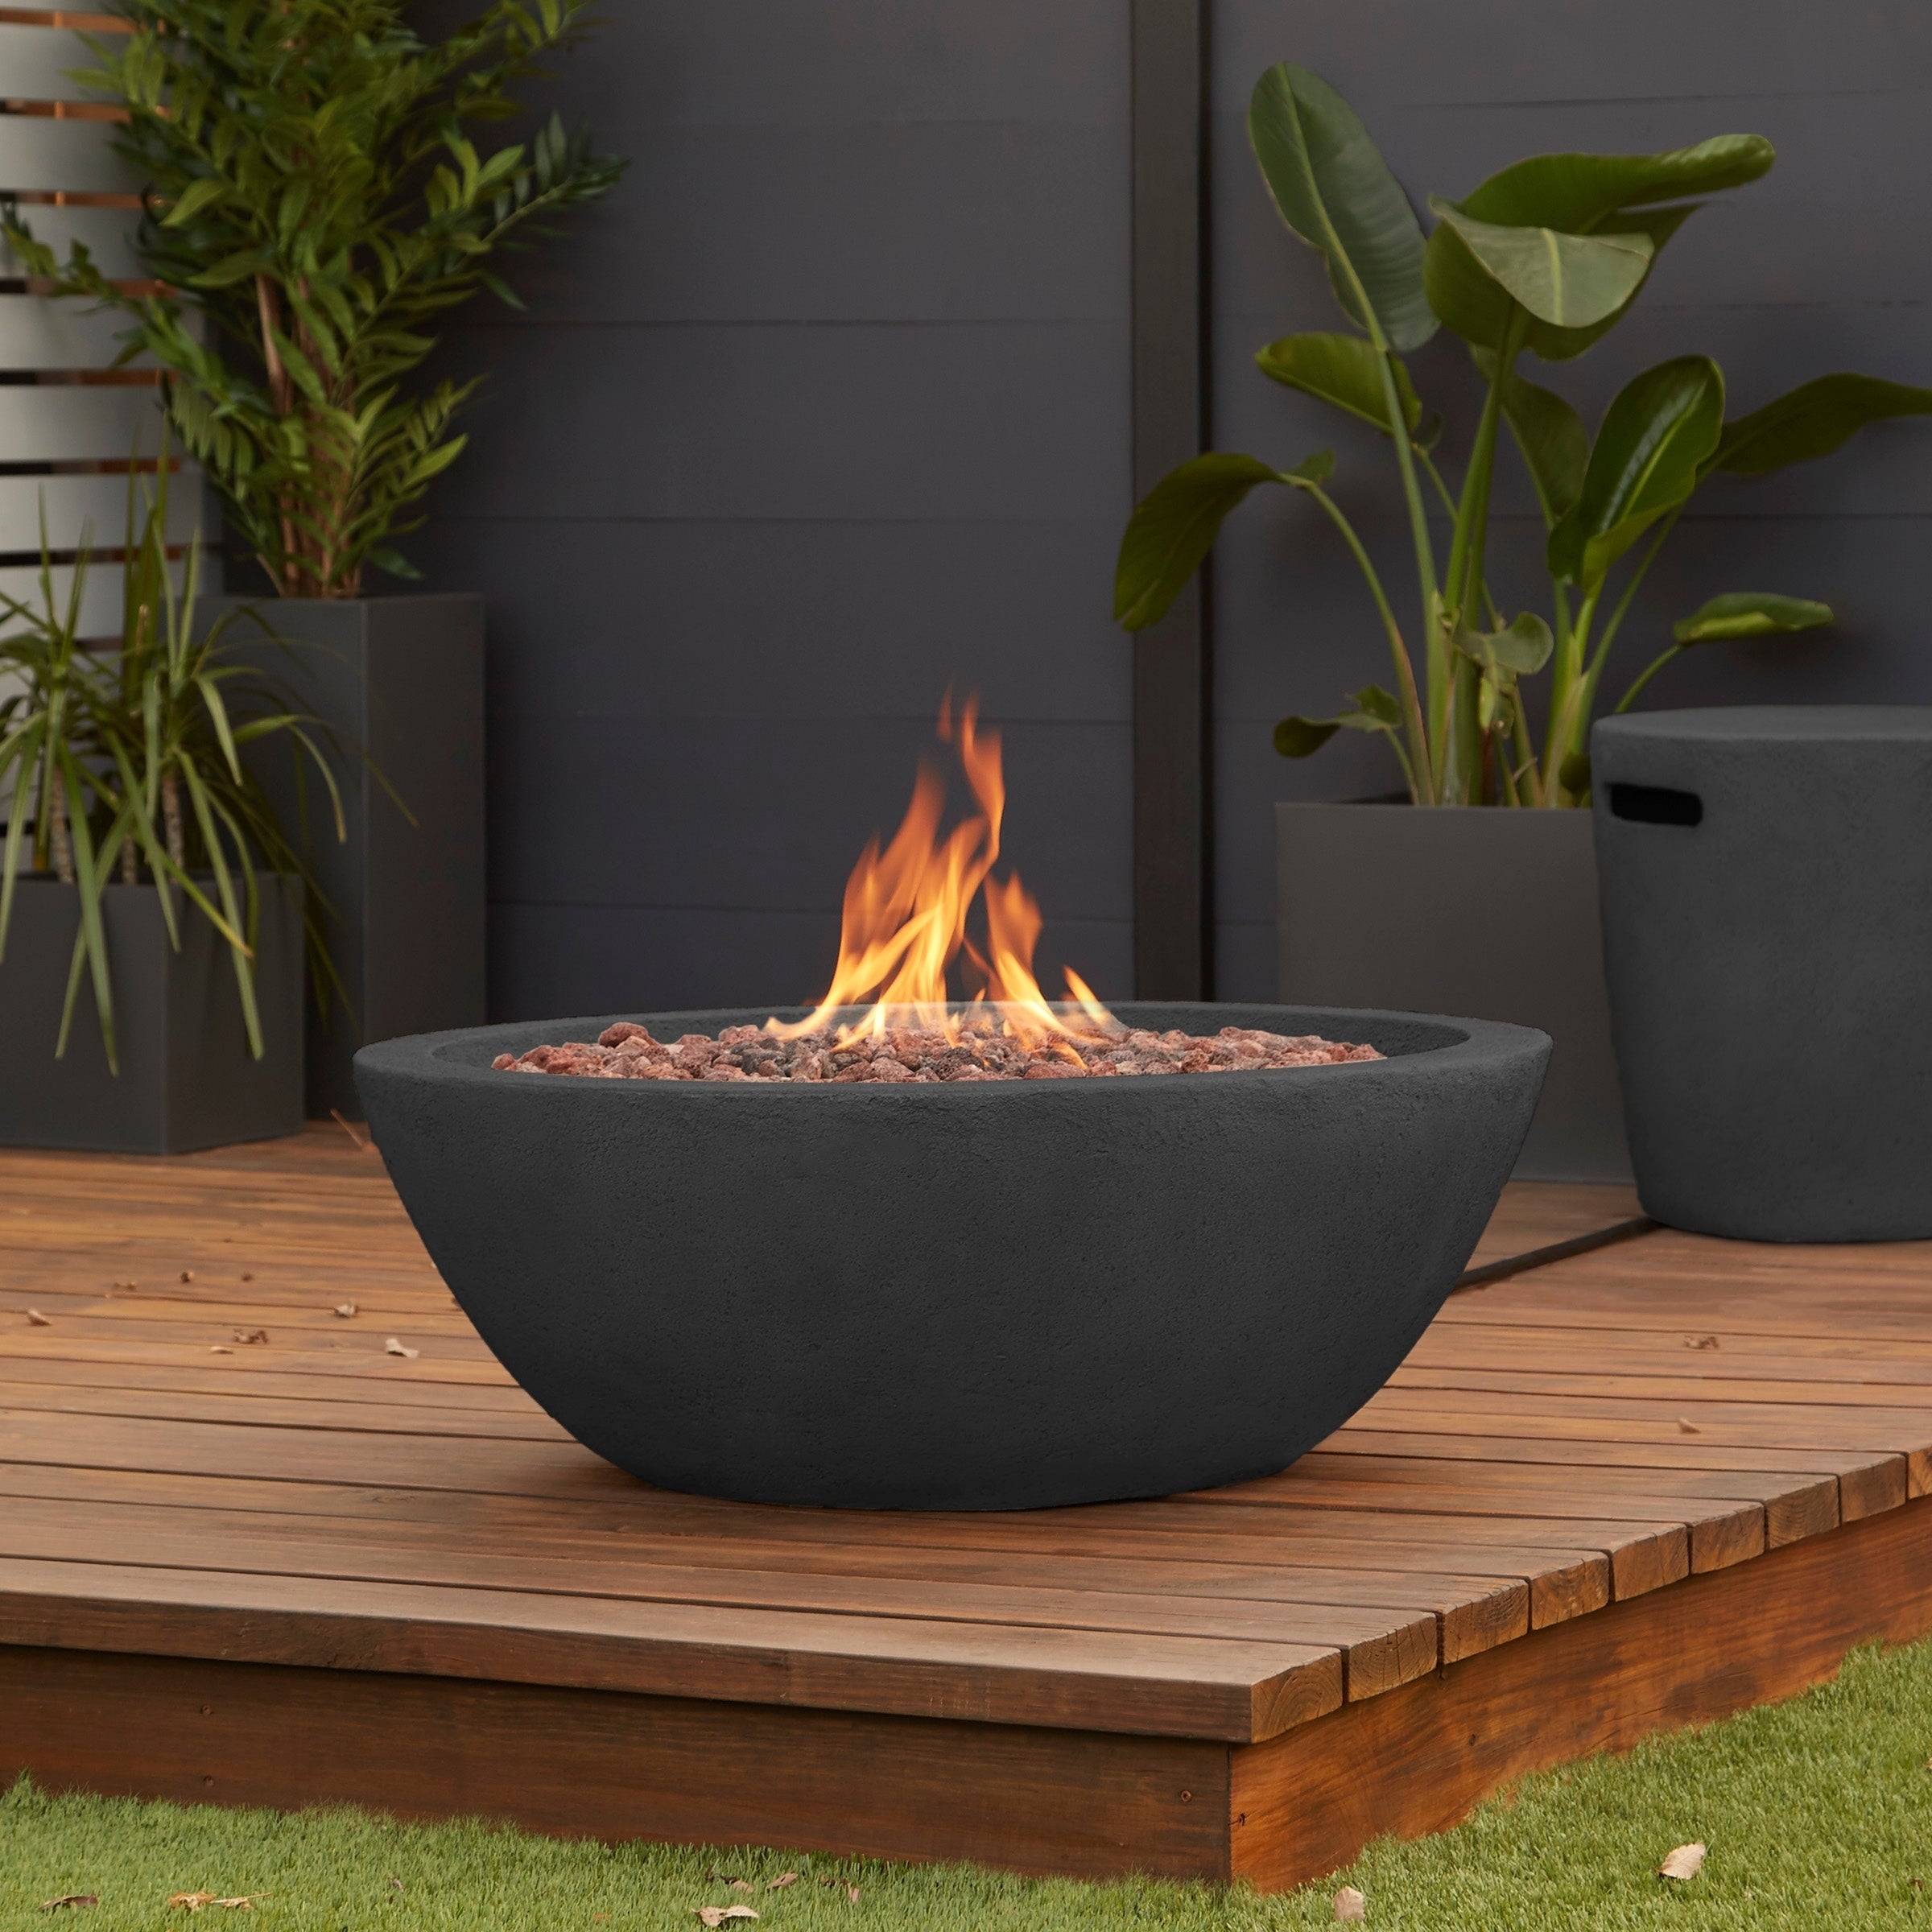 Propane Tank for Gas Fireplace Fresh Riverside Gas Fire Bowl In Shale